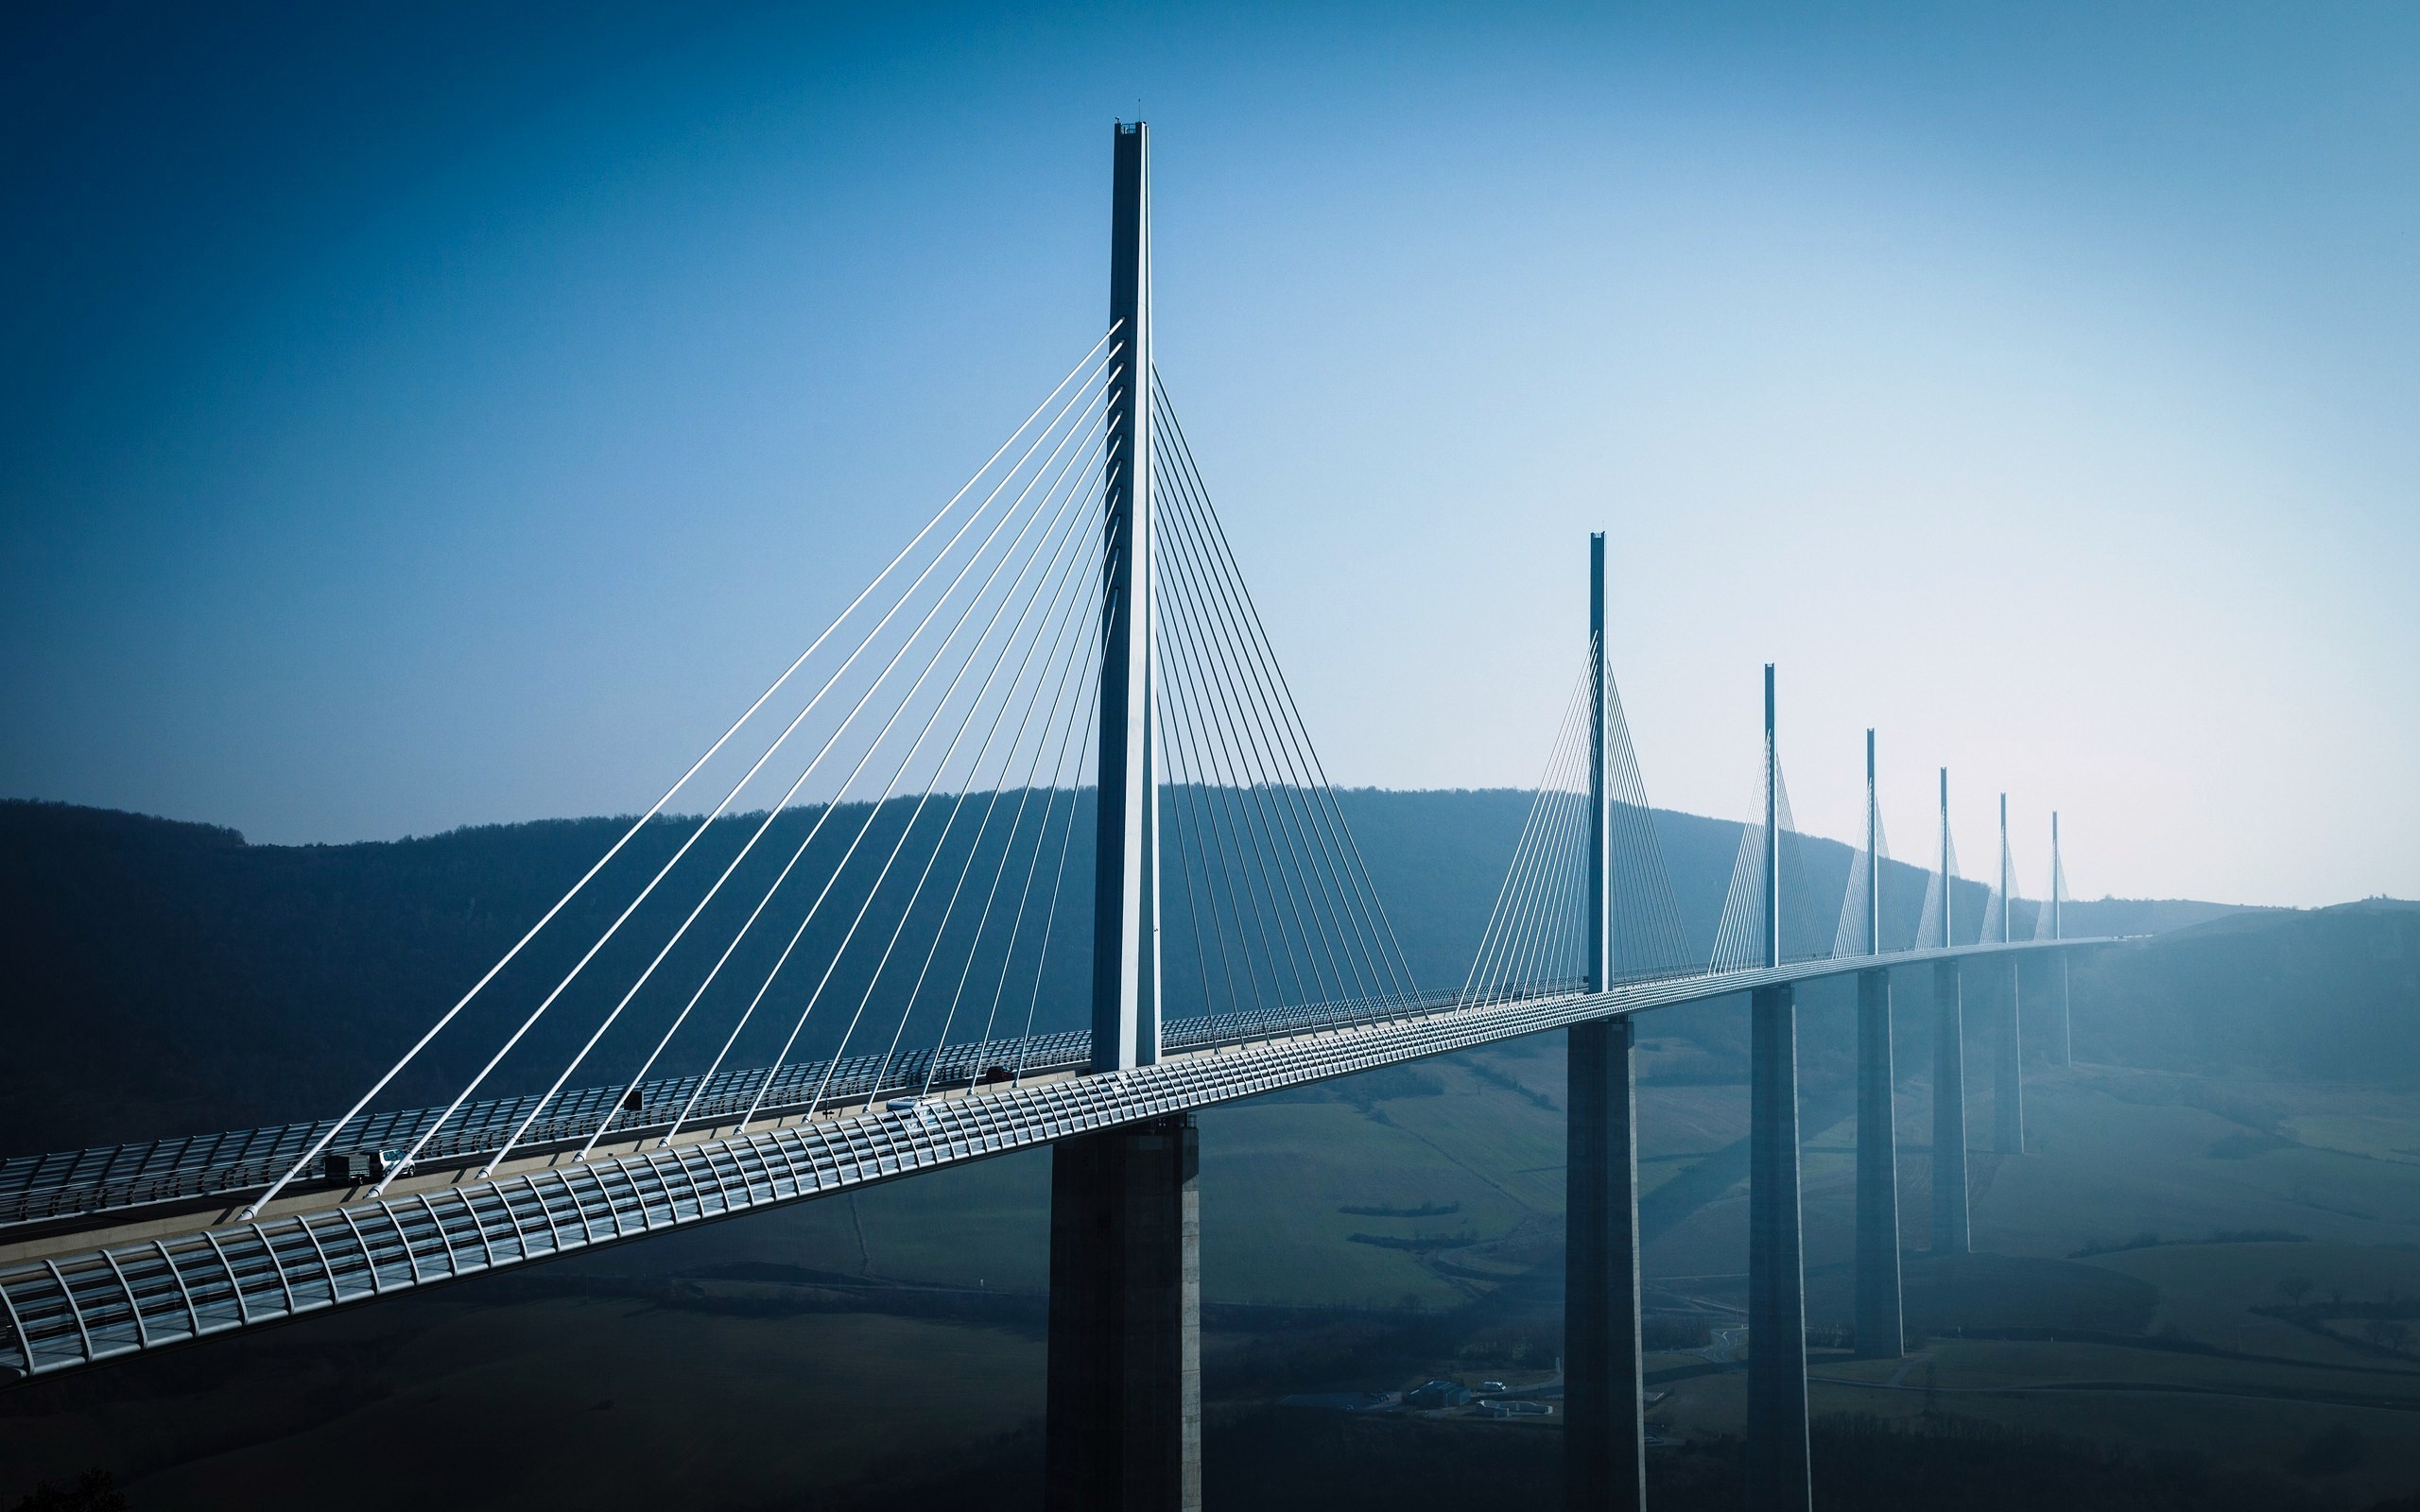 6 Millau Viaduct HD Wallpapers Backgrounds - Wallpaper Abyss